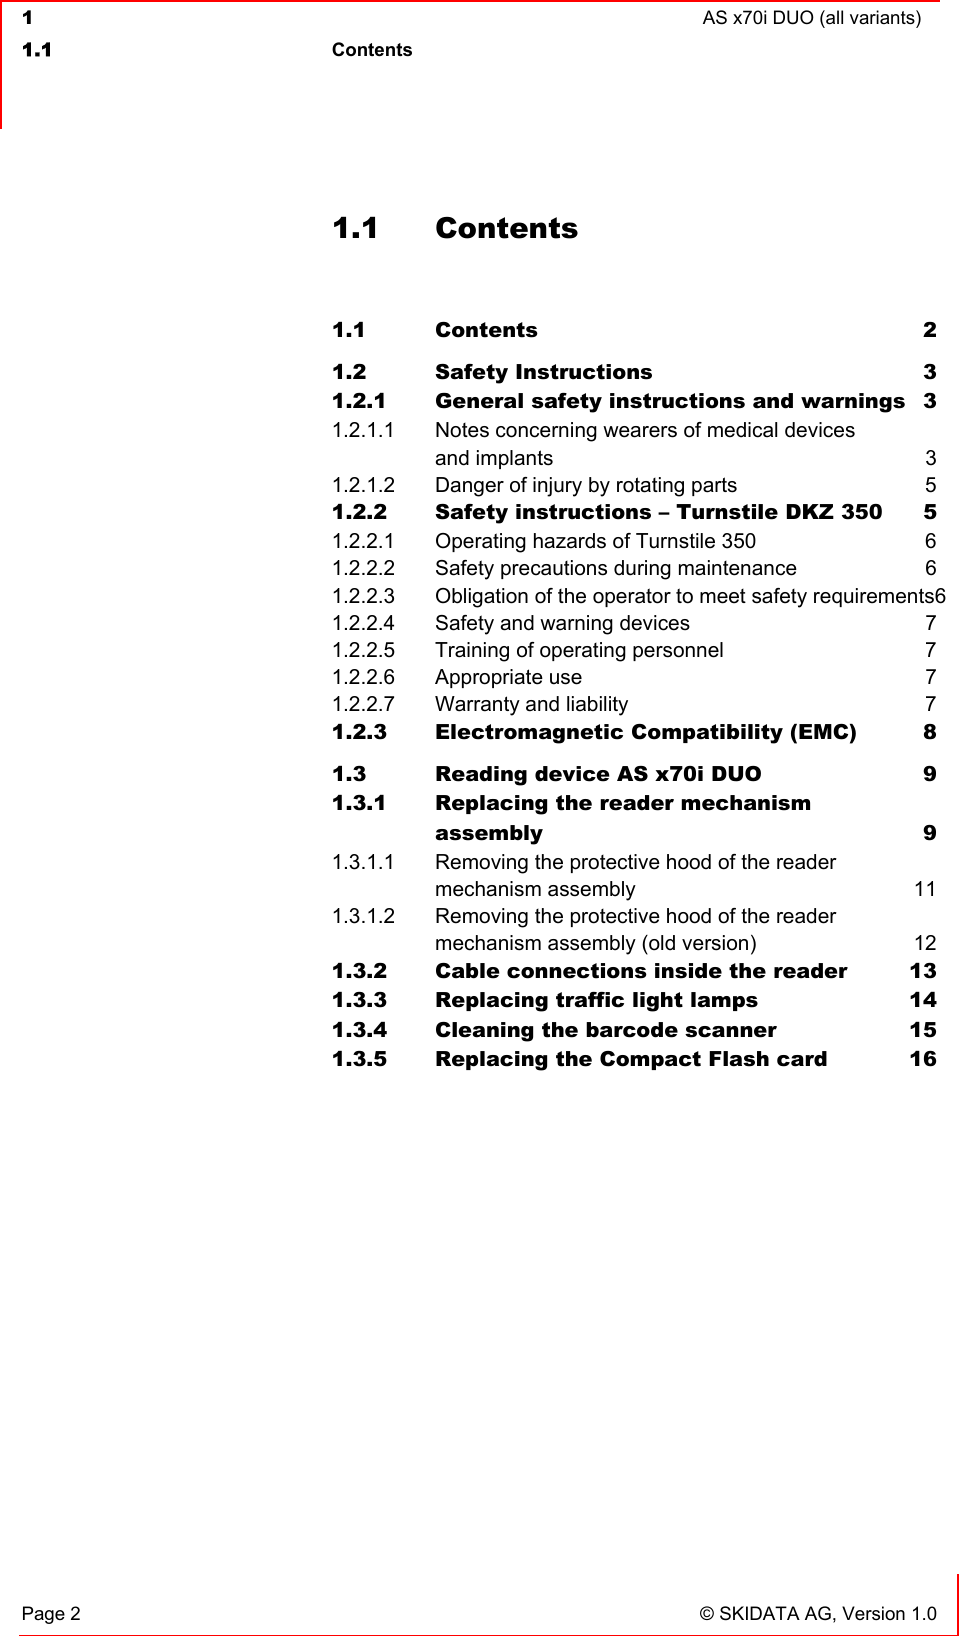  1  AS x70i DUO (all variants)  1.1 Contents   Page 2  © SKIDATA AG, Version 1.0 1.1 Contents  1.1 Contents 2 1.2 Safety Instructions  3 1.2.1 General safety instructions and warnings  3 1.2.1.1 Notes concerning wearers of medical devices  and implants  3 1.2.1.2 Danger of injury by rotating parts  5 1.2.2 Safety instructions – Turnstile DKZ 350  5 1.2.2.1 Operating hazards of Turnstile 350  6 1.2.2.2 Safety precautions during maintenance  6 1.2.2.3 Obligation of the operator to meet safety requirements6 1.2.2.4 Safety and warning devices  7 1.2.2.5 Training of operating personnel  7 1.2.2.6 Appropriate use  7 1.2.2.7 Warranty and liability  7 1.2.3 Electromagnetic Compatibility (EMC)  8 1.3 Reading device AS x70i DUO  9 1.3.1 Replacing the reader mechanism  assembly 9 1.3.1.1 Removing the protective hood of the reader  mechanism assembly  11 1.3.1.2 Removing the protective hood of the reader  mechanism assembly (old version)  12 1.3.2 Cable connections inside the reader  13 1.3.3 Replacing traffic light lamps  14 1.3.4 Cleaning the barcode scanner  15 1.3.5 Replacing the Compact Flash card  16   